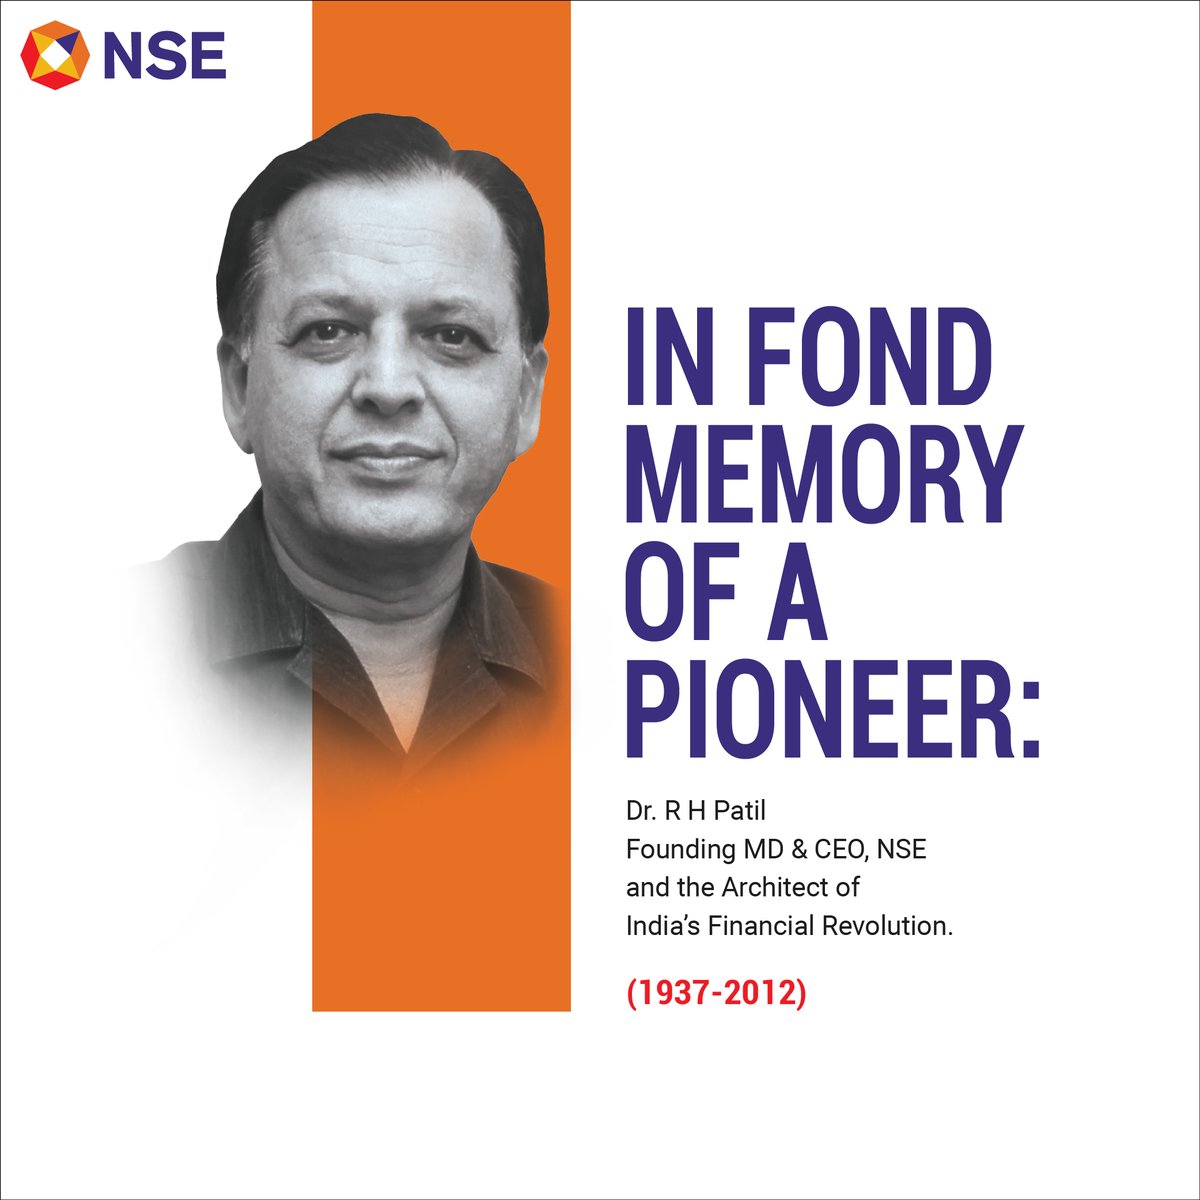 NSE pays homage to the visionary, Dr. R H Patil. His pioneering efforts led to the foundation of NSE and shaped India's financial revolution. #NSEIndia #Leadership #Visionary @ashishchauhan